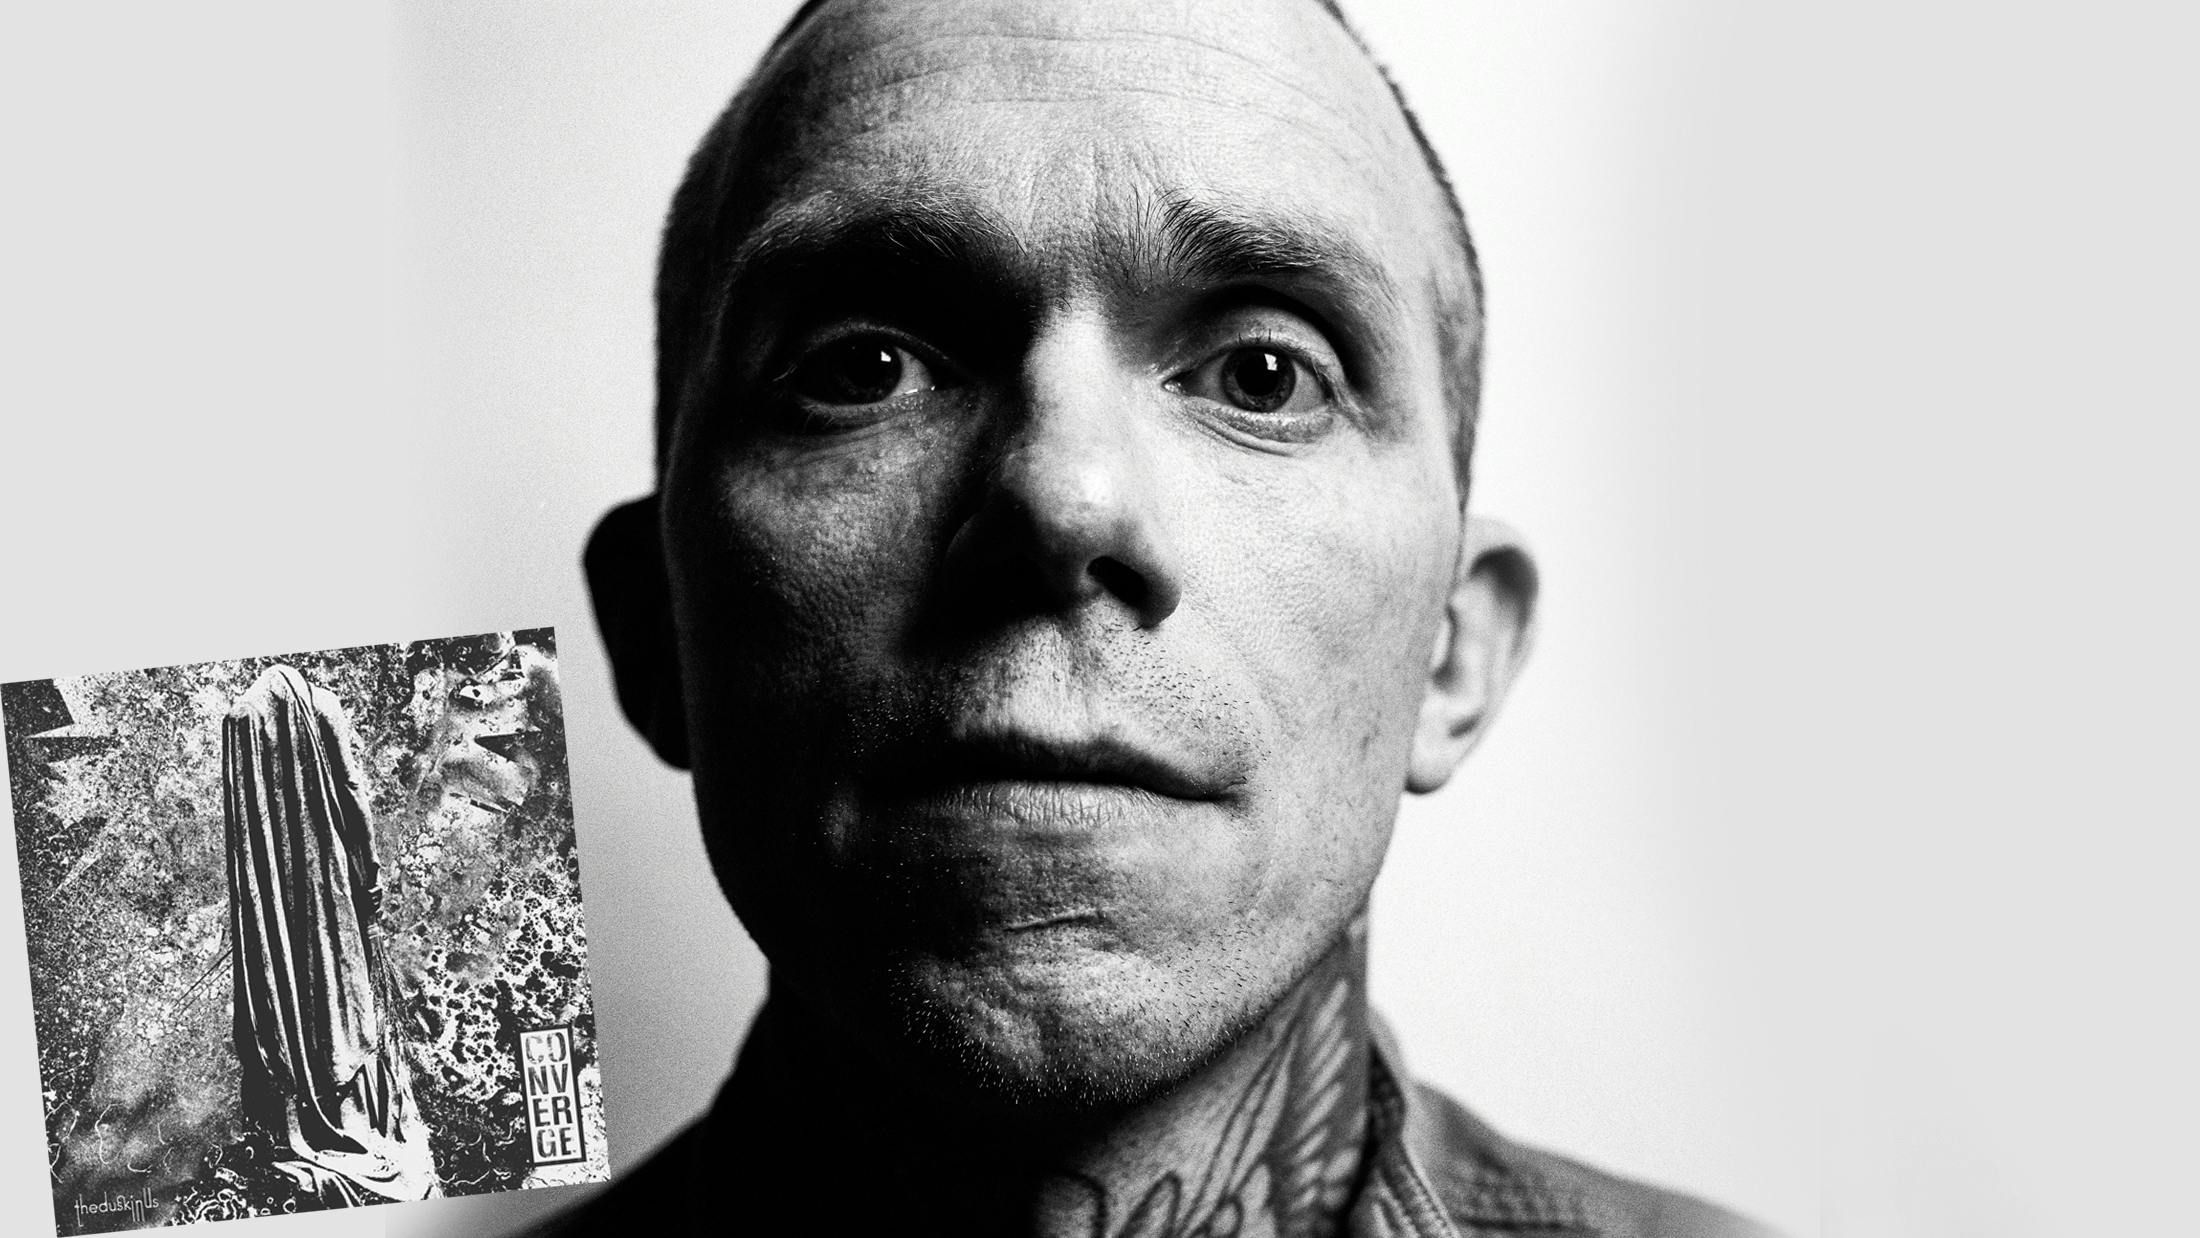 Converge's Jacob Bannon Talks To Us About The New Album, His Creative Process And The Future Of The Band